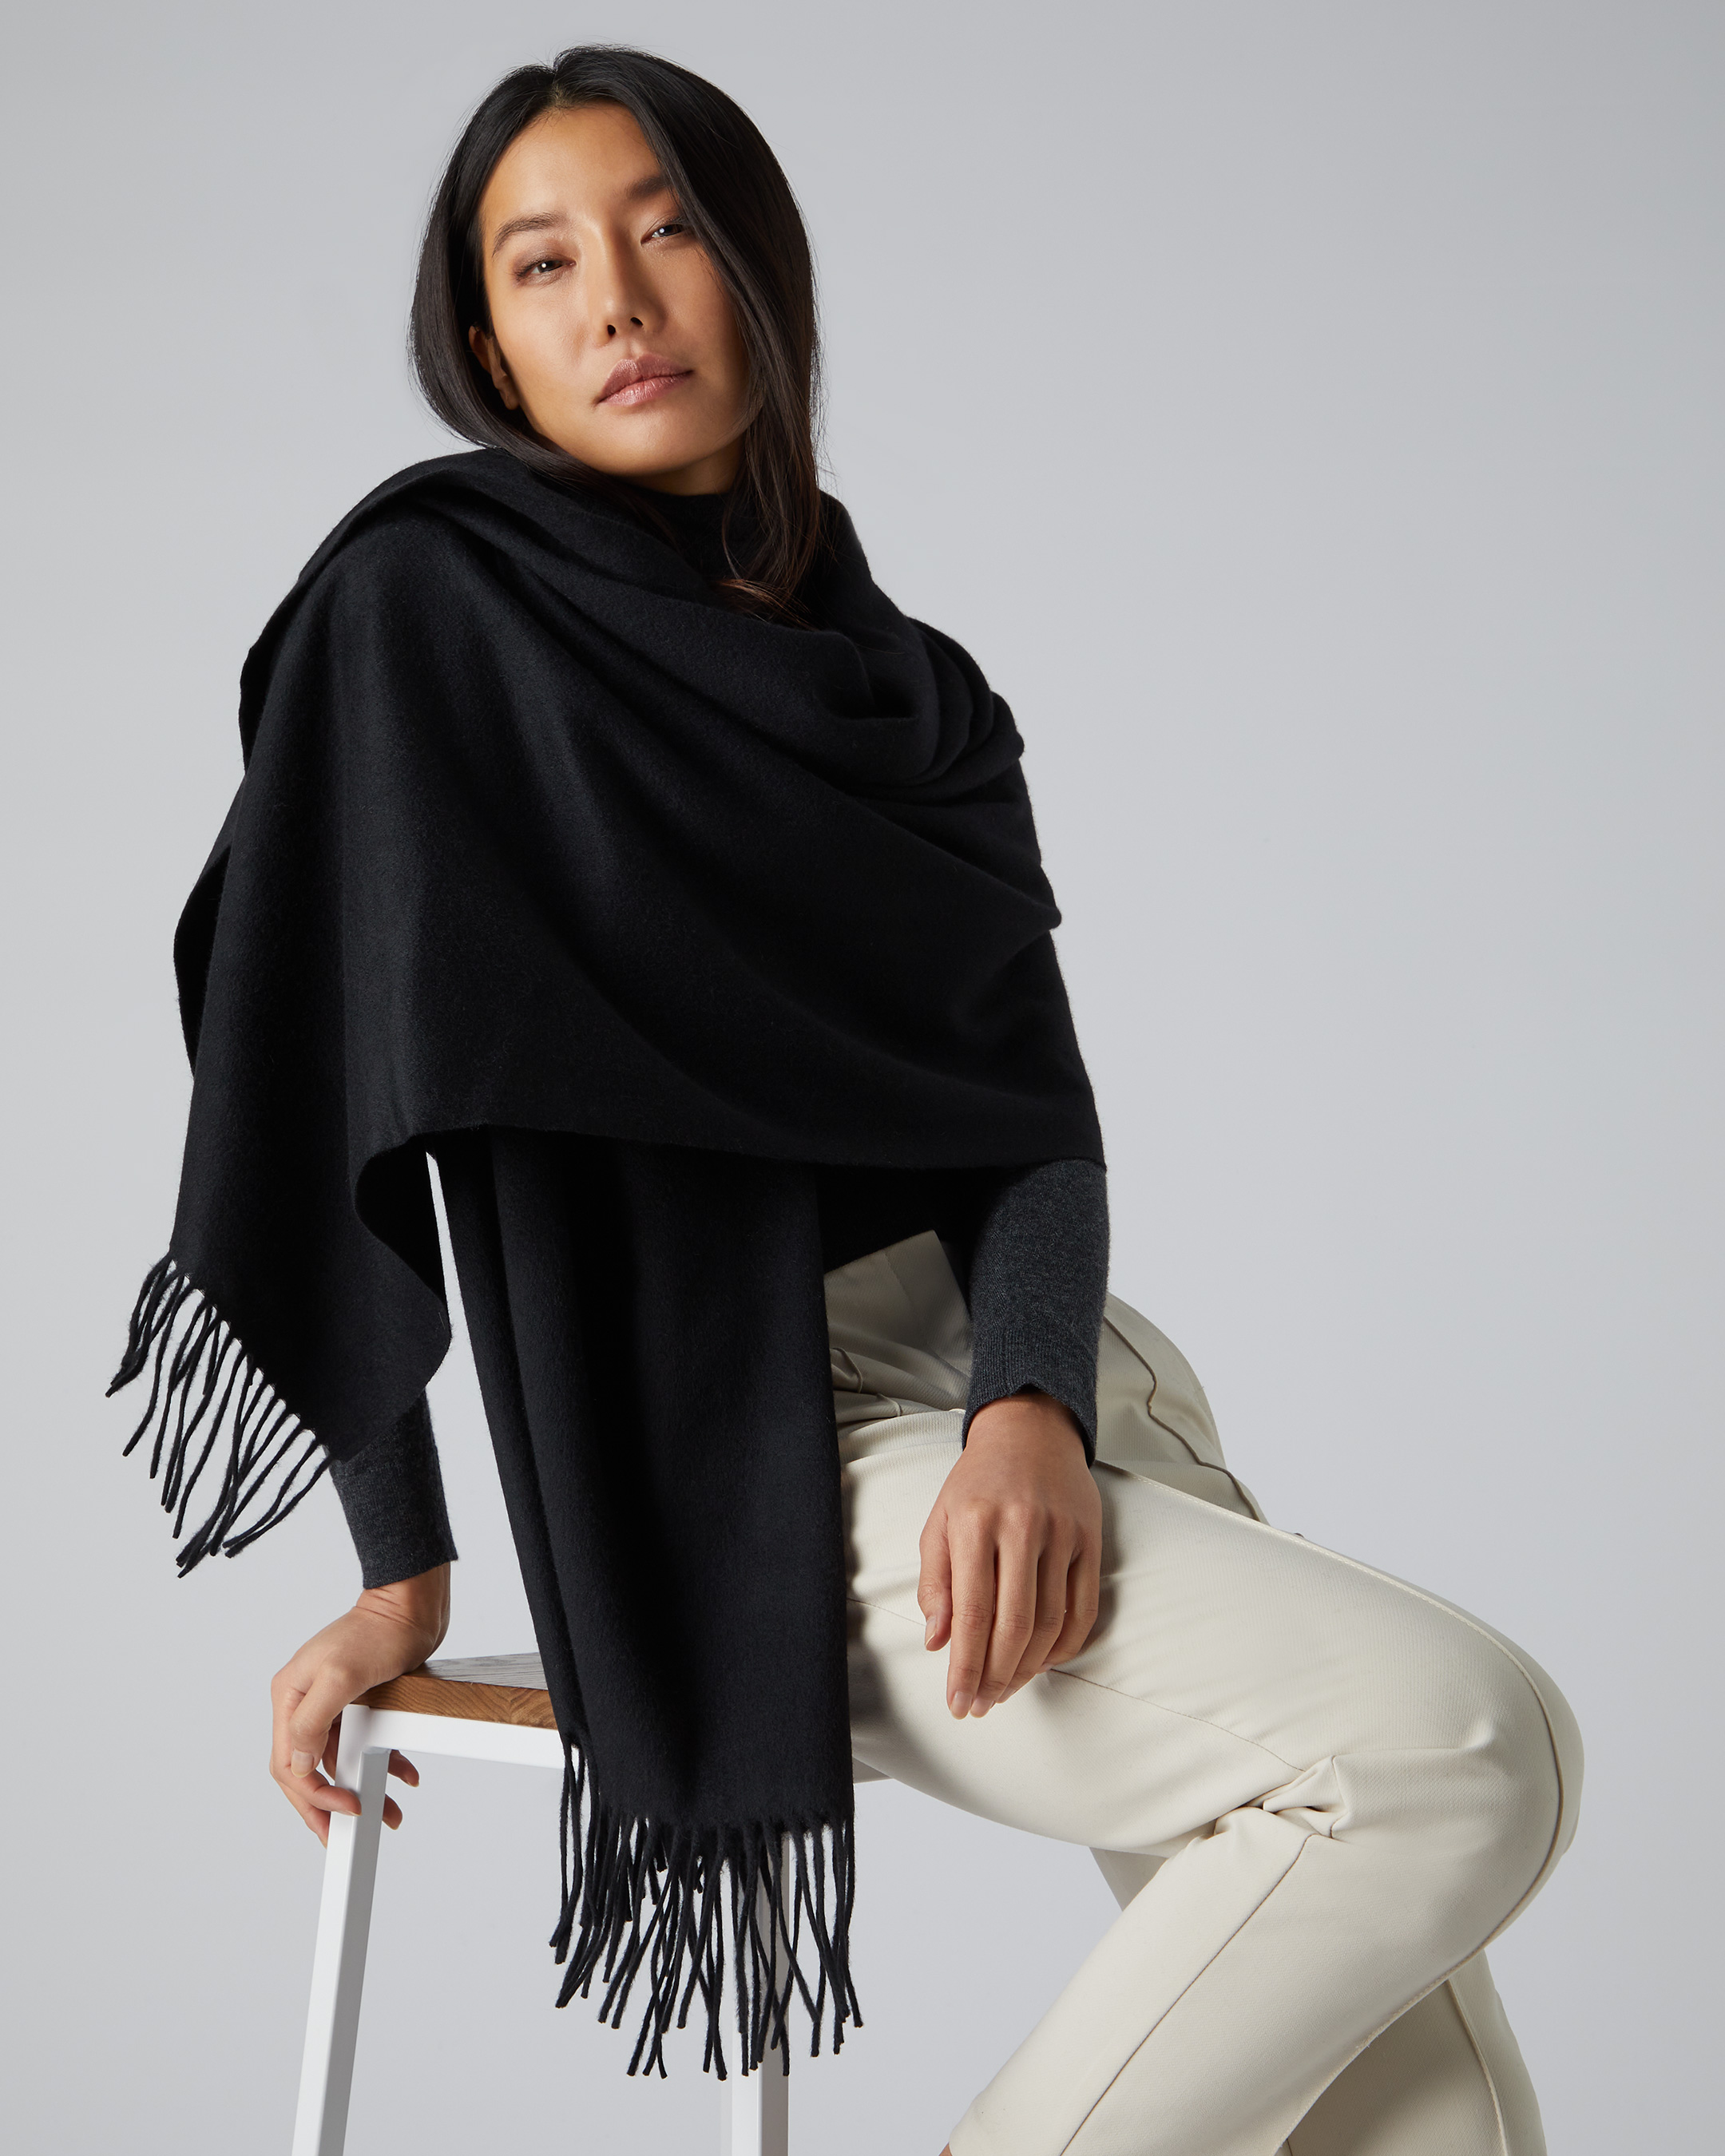 N.Peal fringed-edge woven cashmere shawl - Brown